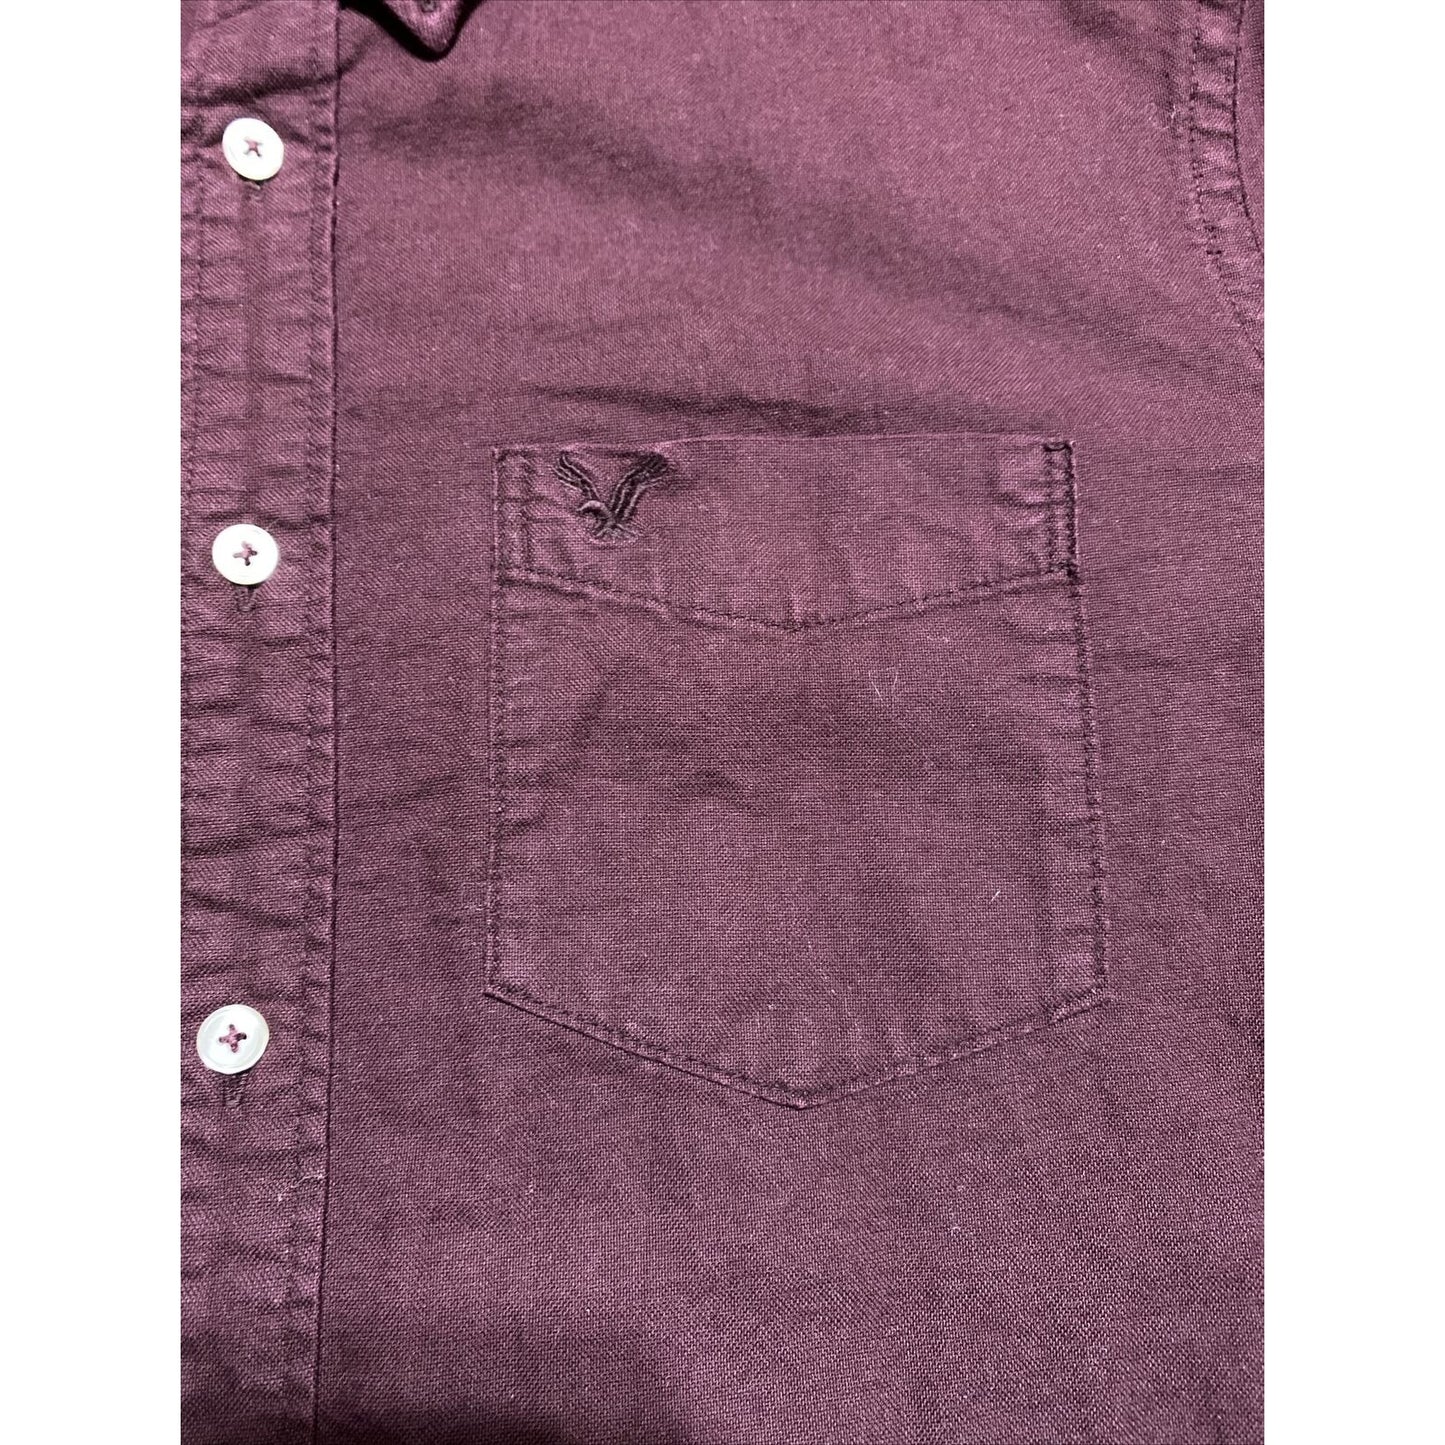 American Eagle Outfitters Men’s Medium Plum Button-down Classic Fit Long Sleeves